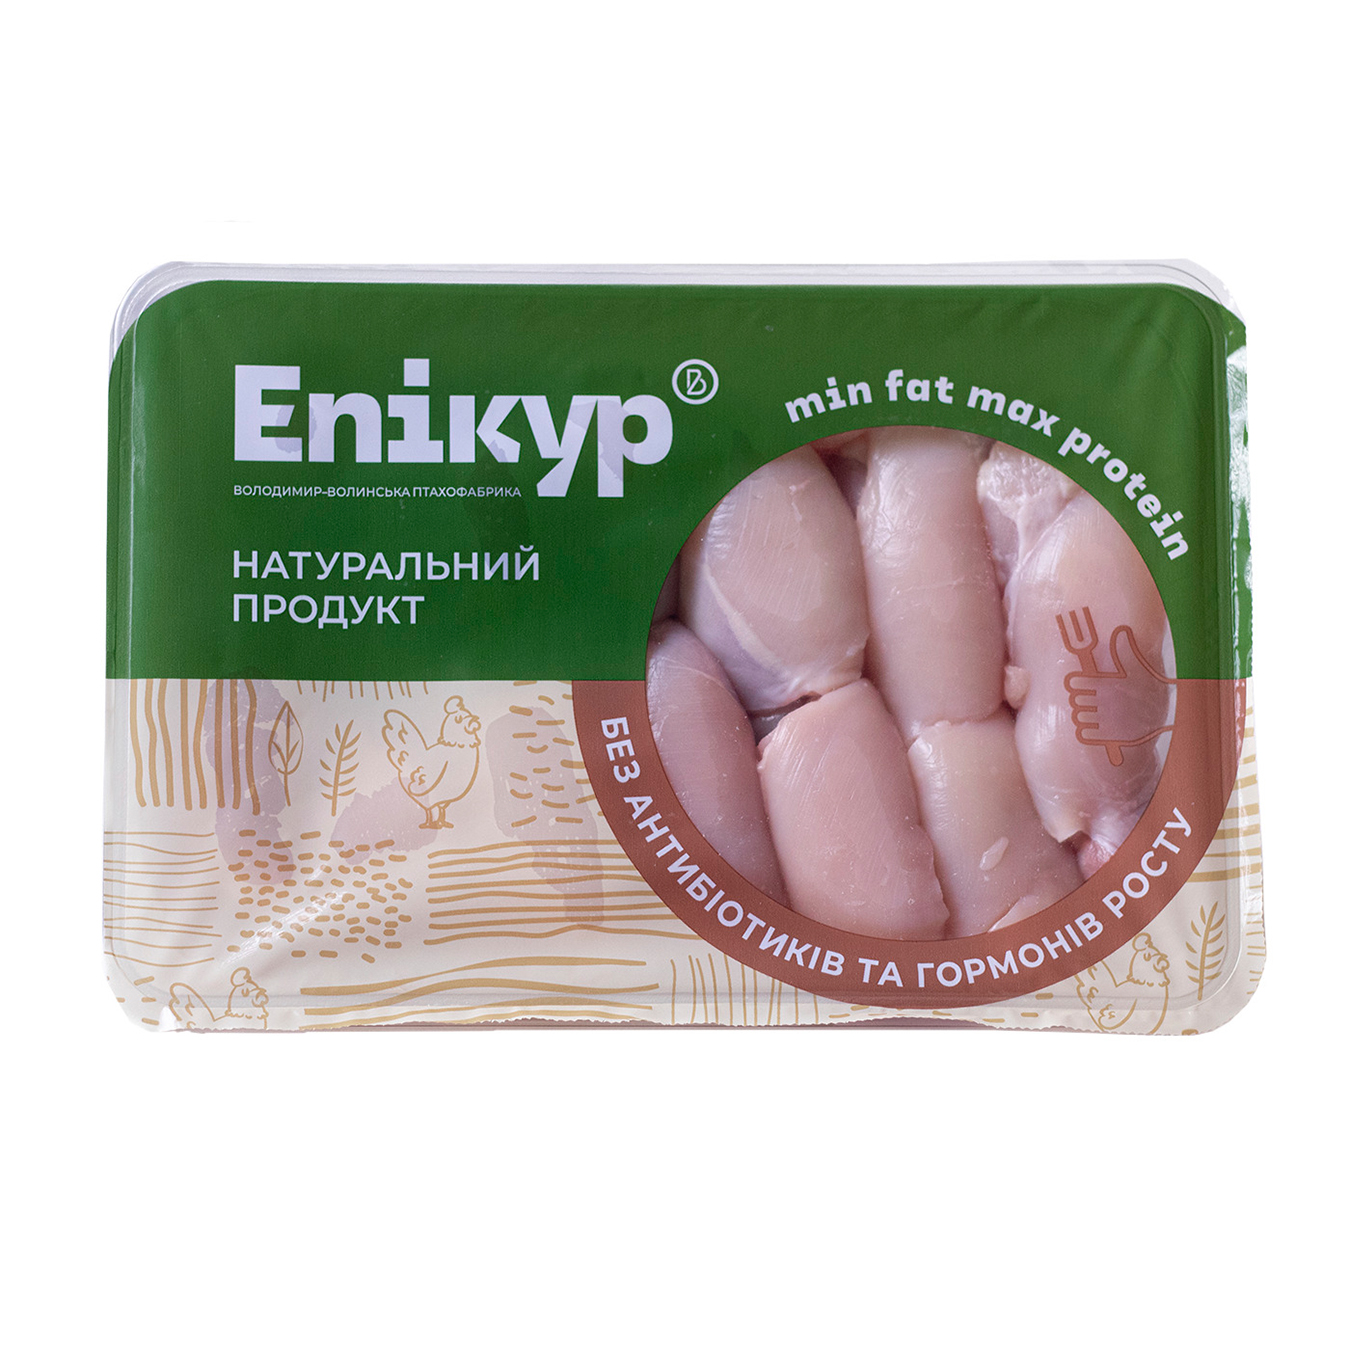 Epicure broiler chicken thigh fillet, chilled, 550-700 grams per package